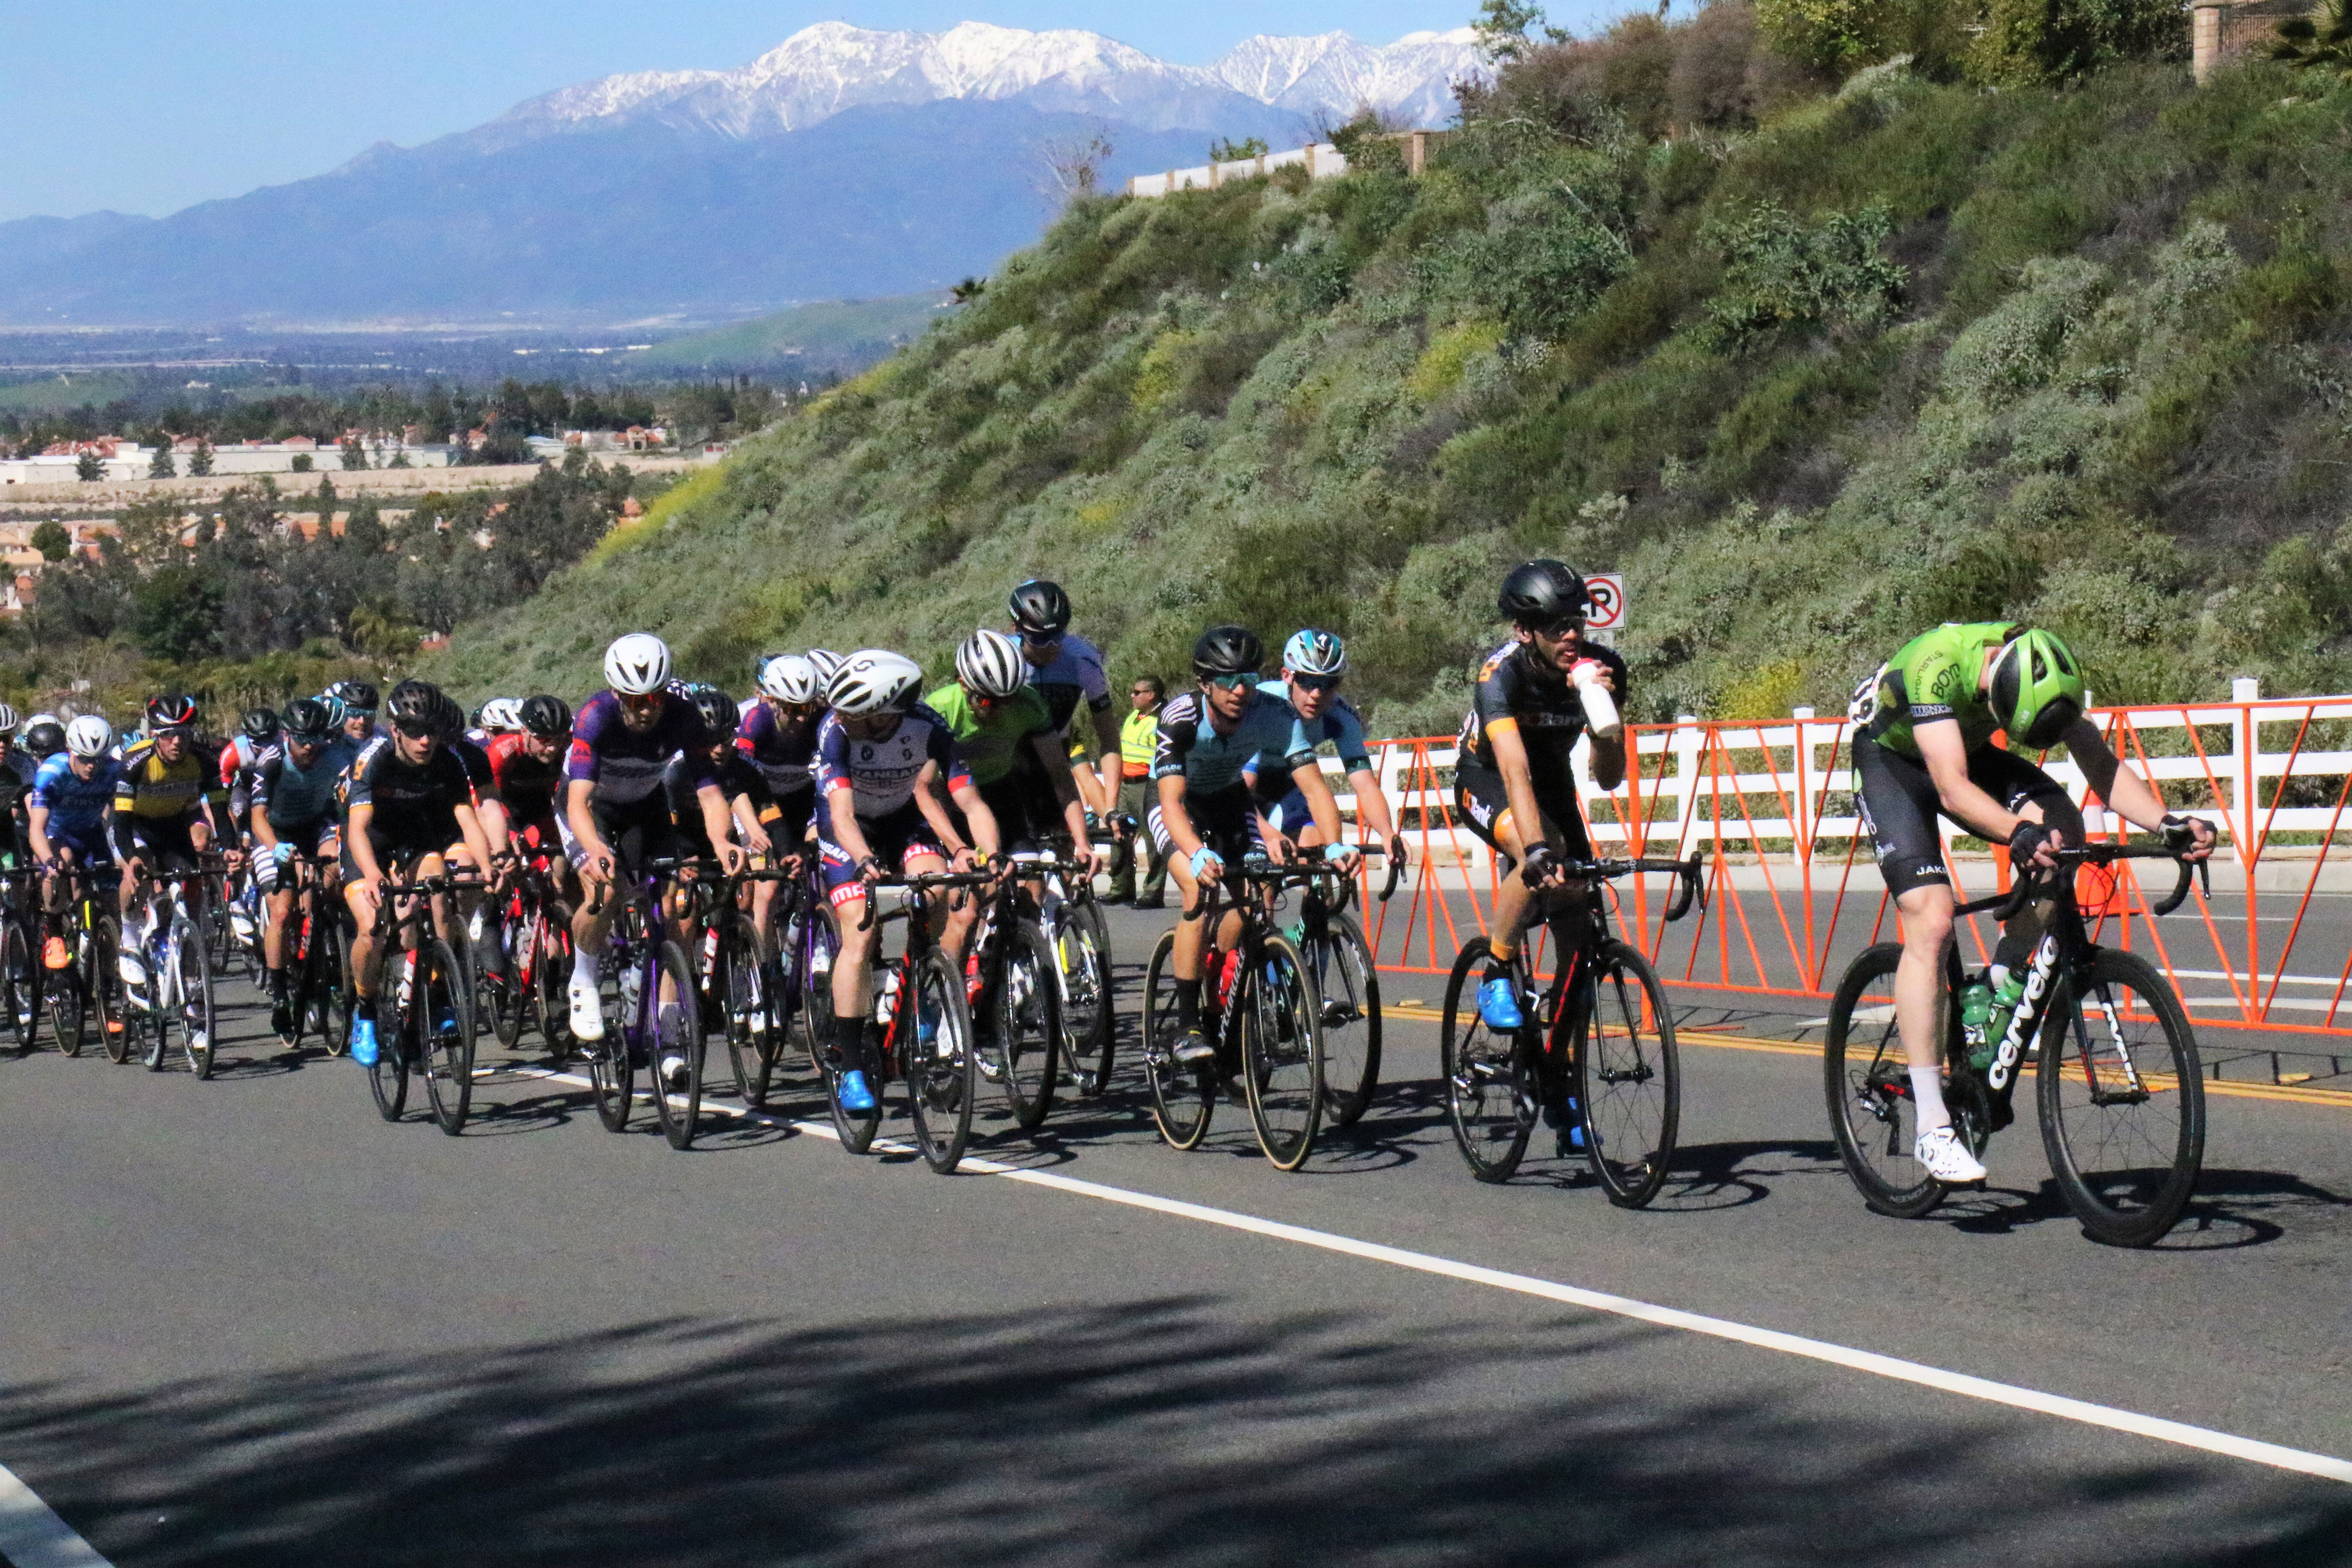 35th Annual Redlands Bicycle Classic Circuit Races kicked off on